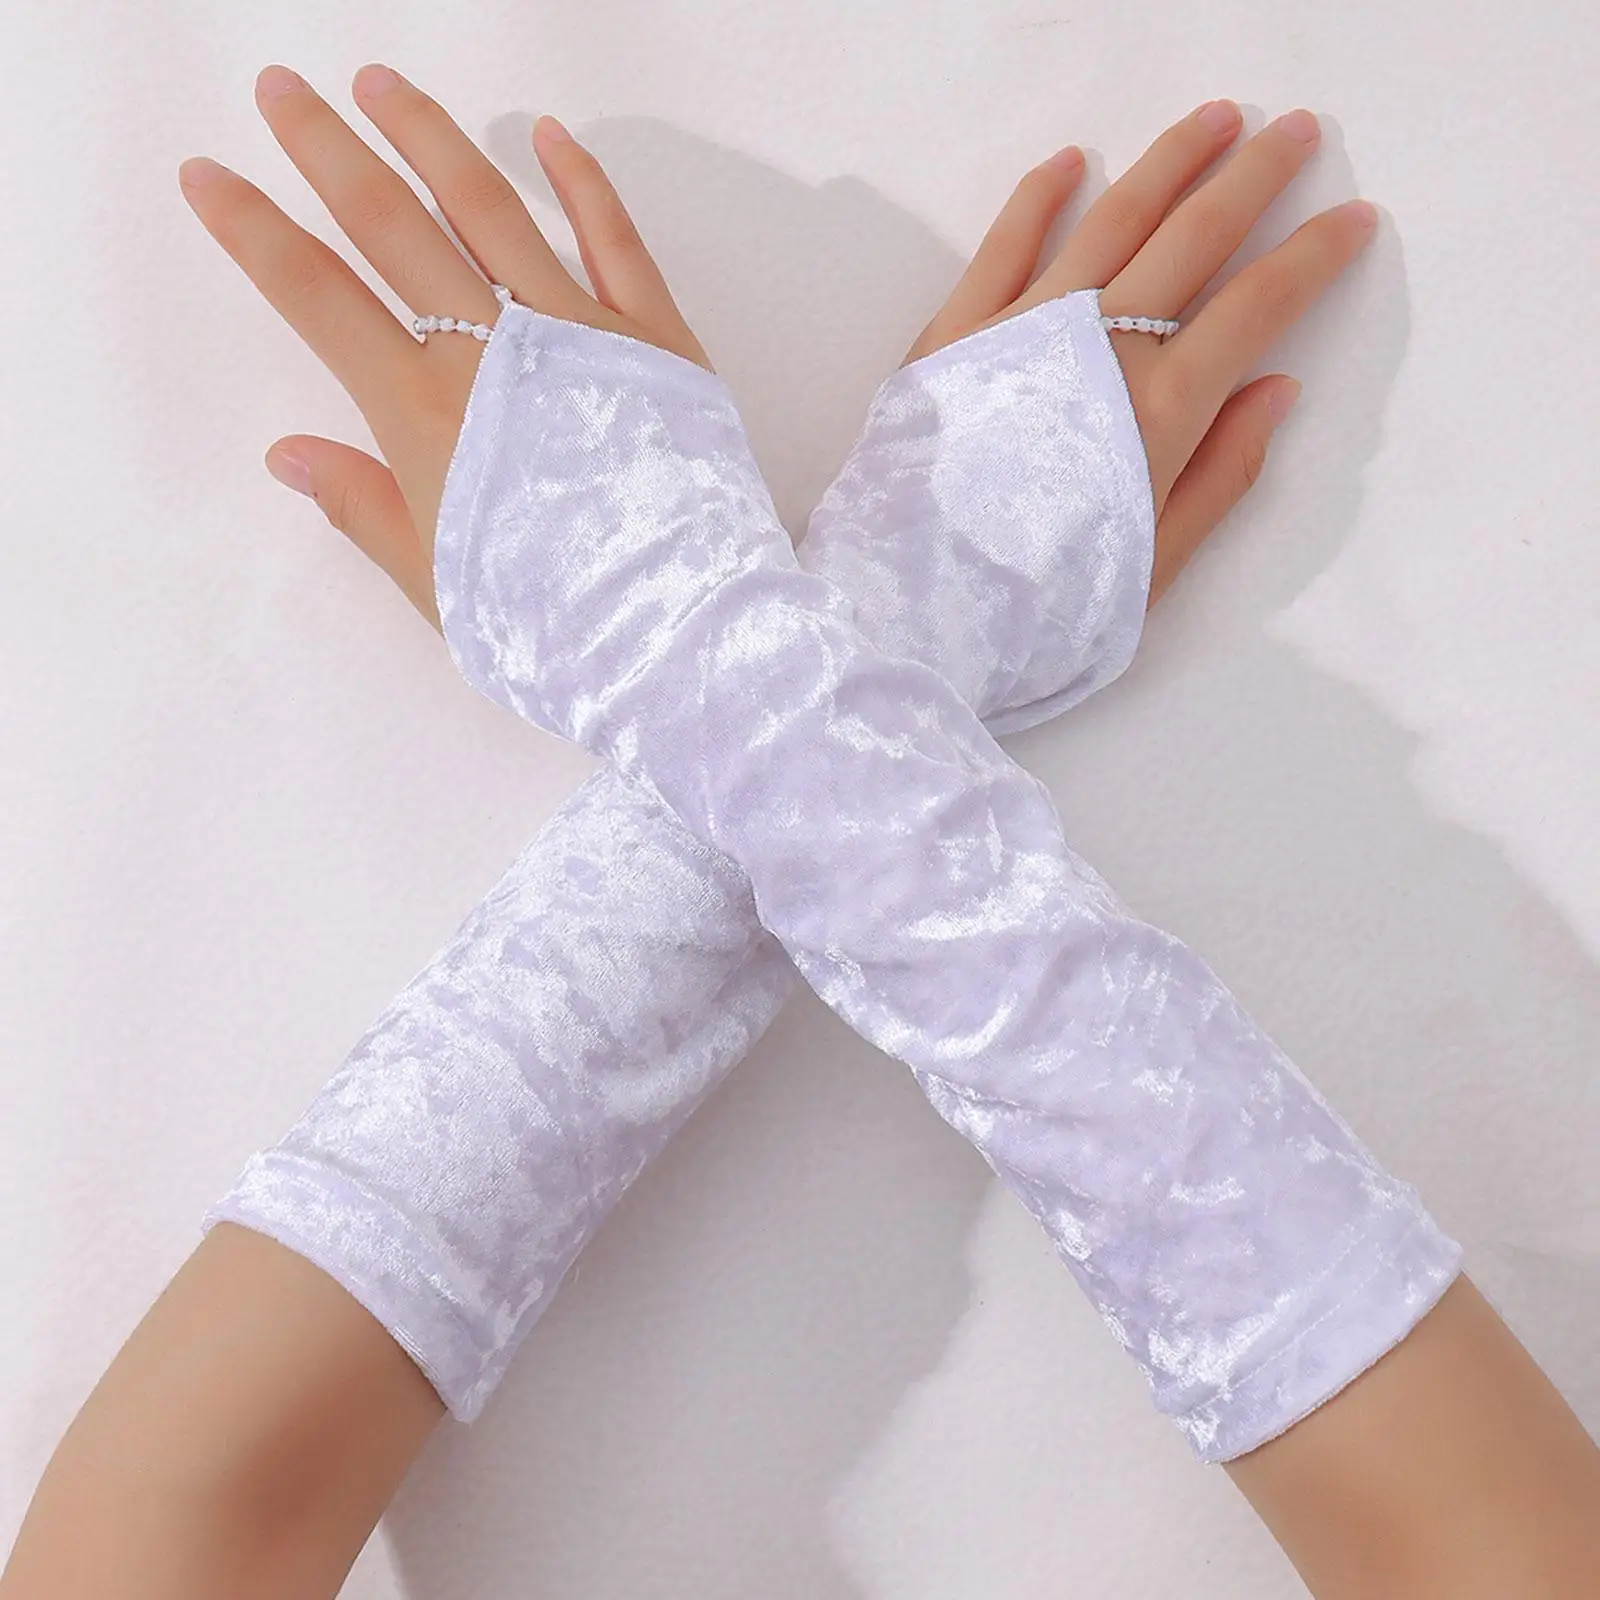 Fashion Fingerless Gloves Arm Warmers Soft Cosplay Casual Women`s Arm Sleeve